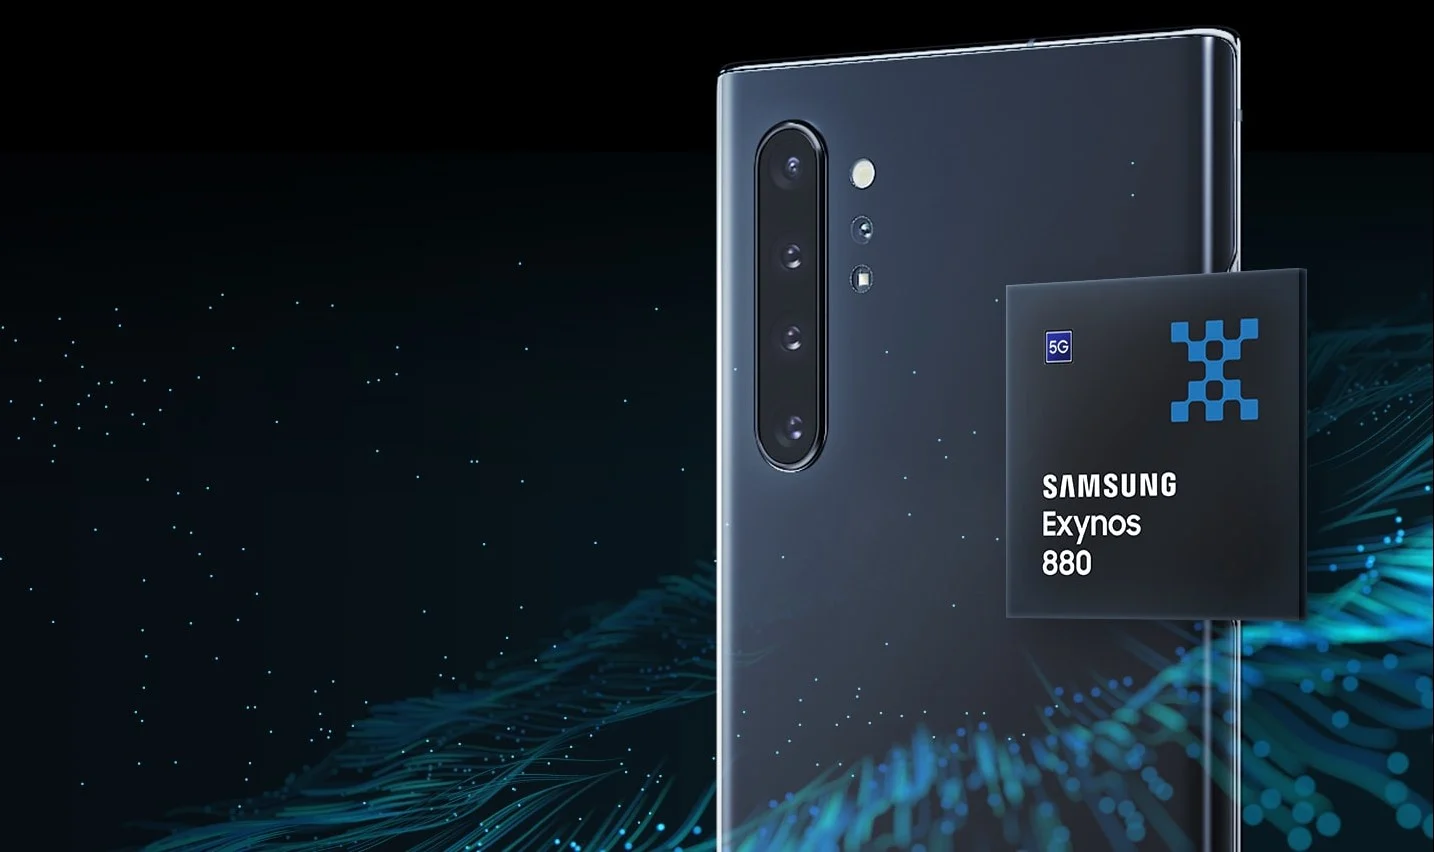 So is the new Exynos 880, rival for Qualcomm and MediaTek?